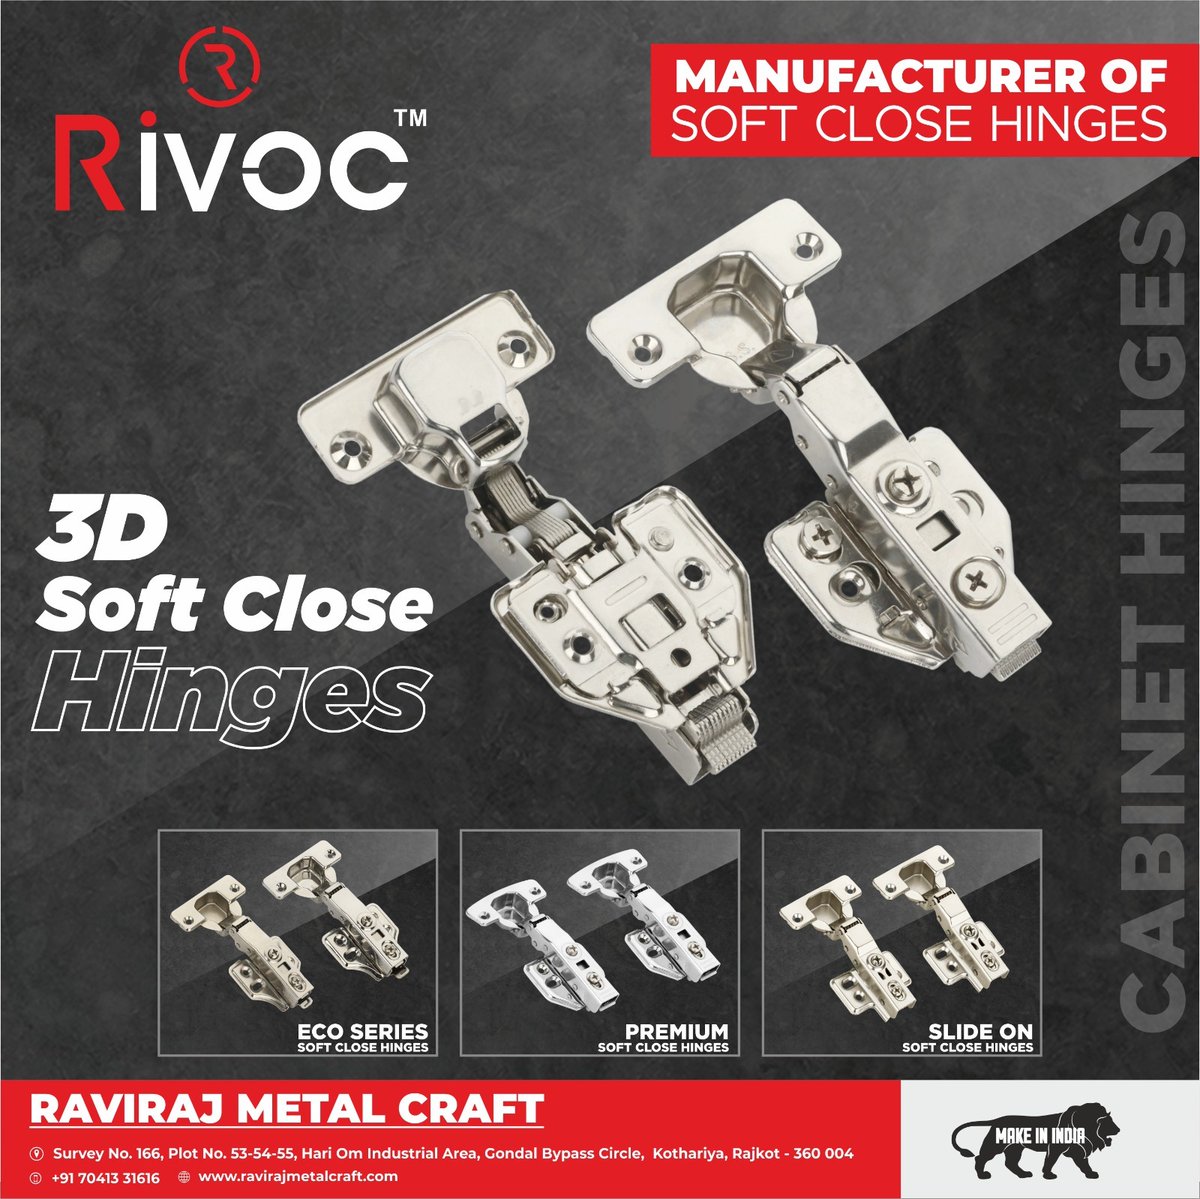 𝐌𝐚𝐧𝐮𝐟𝐚𝐜𝐭𝐮𝐫𝐢𝐧𝐠 𝐒𝐎𝐅𝐓 𝐂𝐋𝐎𝐒𝐄 𝐇𝐈𝐍𝐆𝐄𝐒
Now available in India
- Slide on Types Hinges (MS and SS)
- CLIP on Types Hinges (MS and SS)
- 3D Soft Close Hinges (MS and SS)
#Ravirajmetalcraft #Rivoc #Rajkot #TelescopicSlides #DrawerSlides #TelescopicDrawer #Drawer